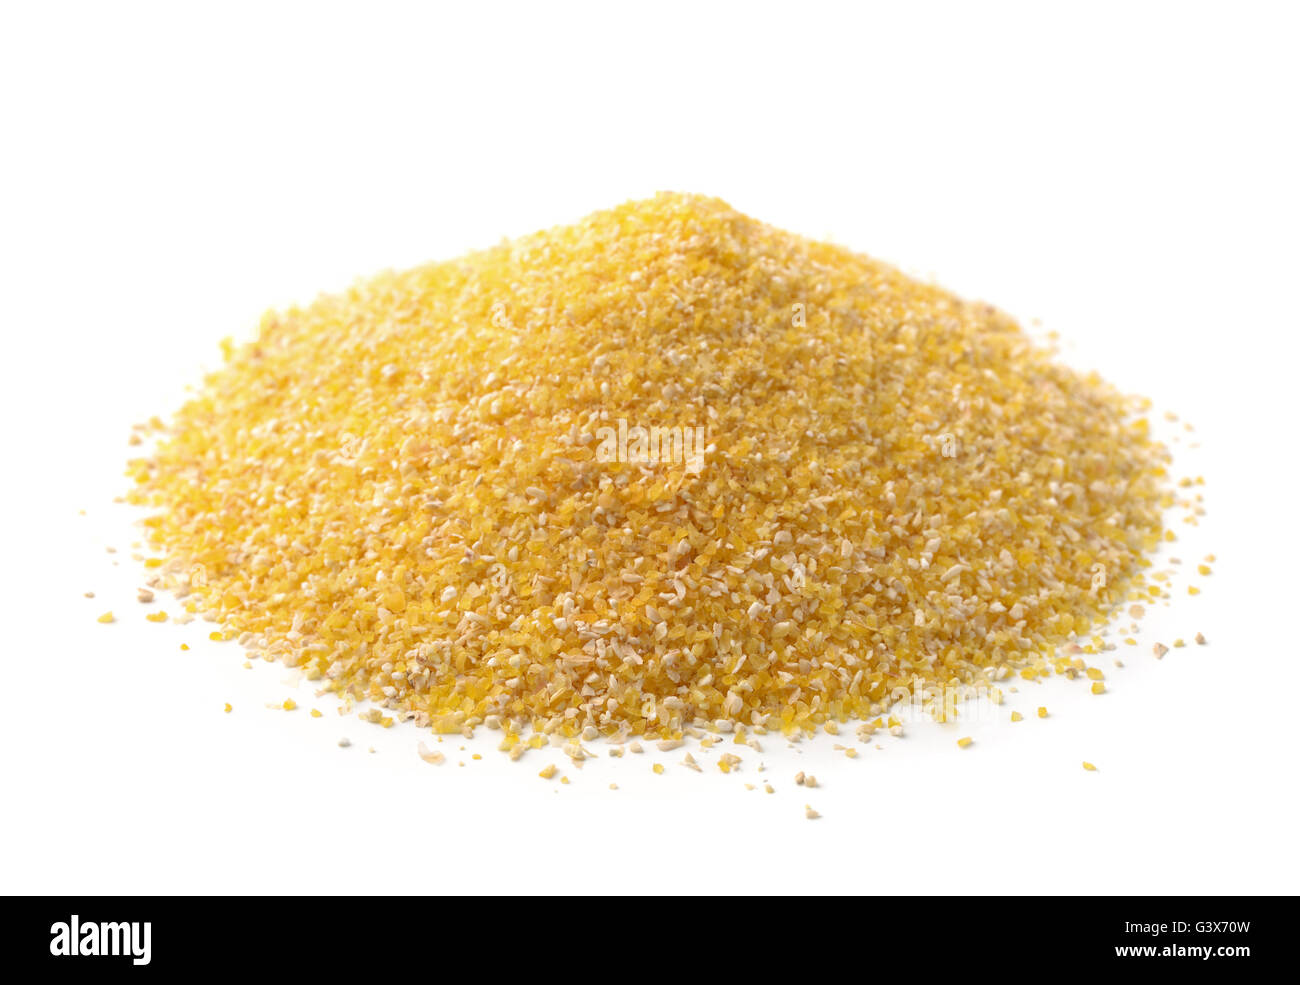 Pile of corn grits isolated on white Stock Photo